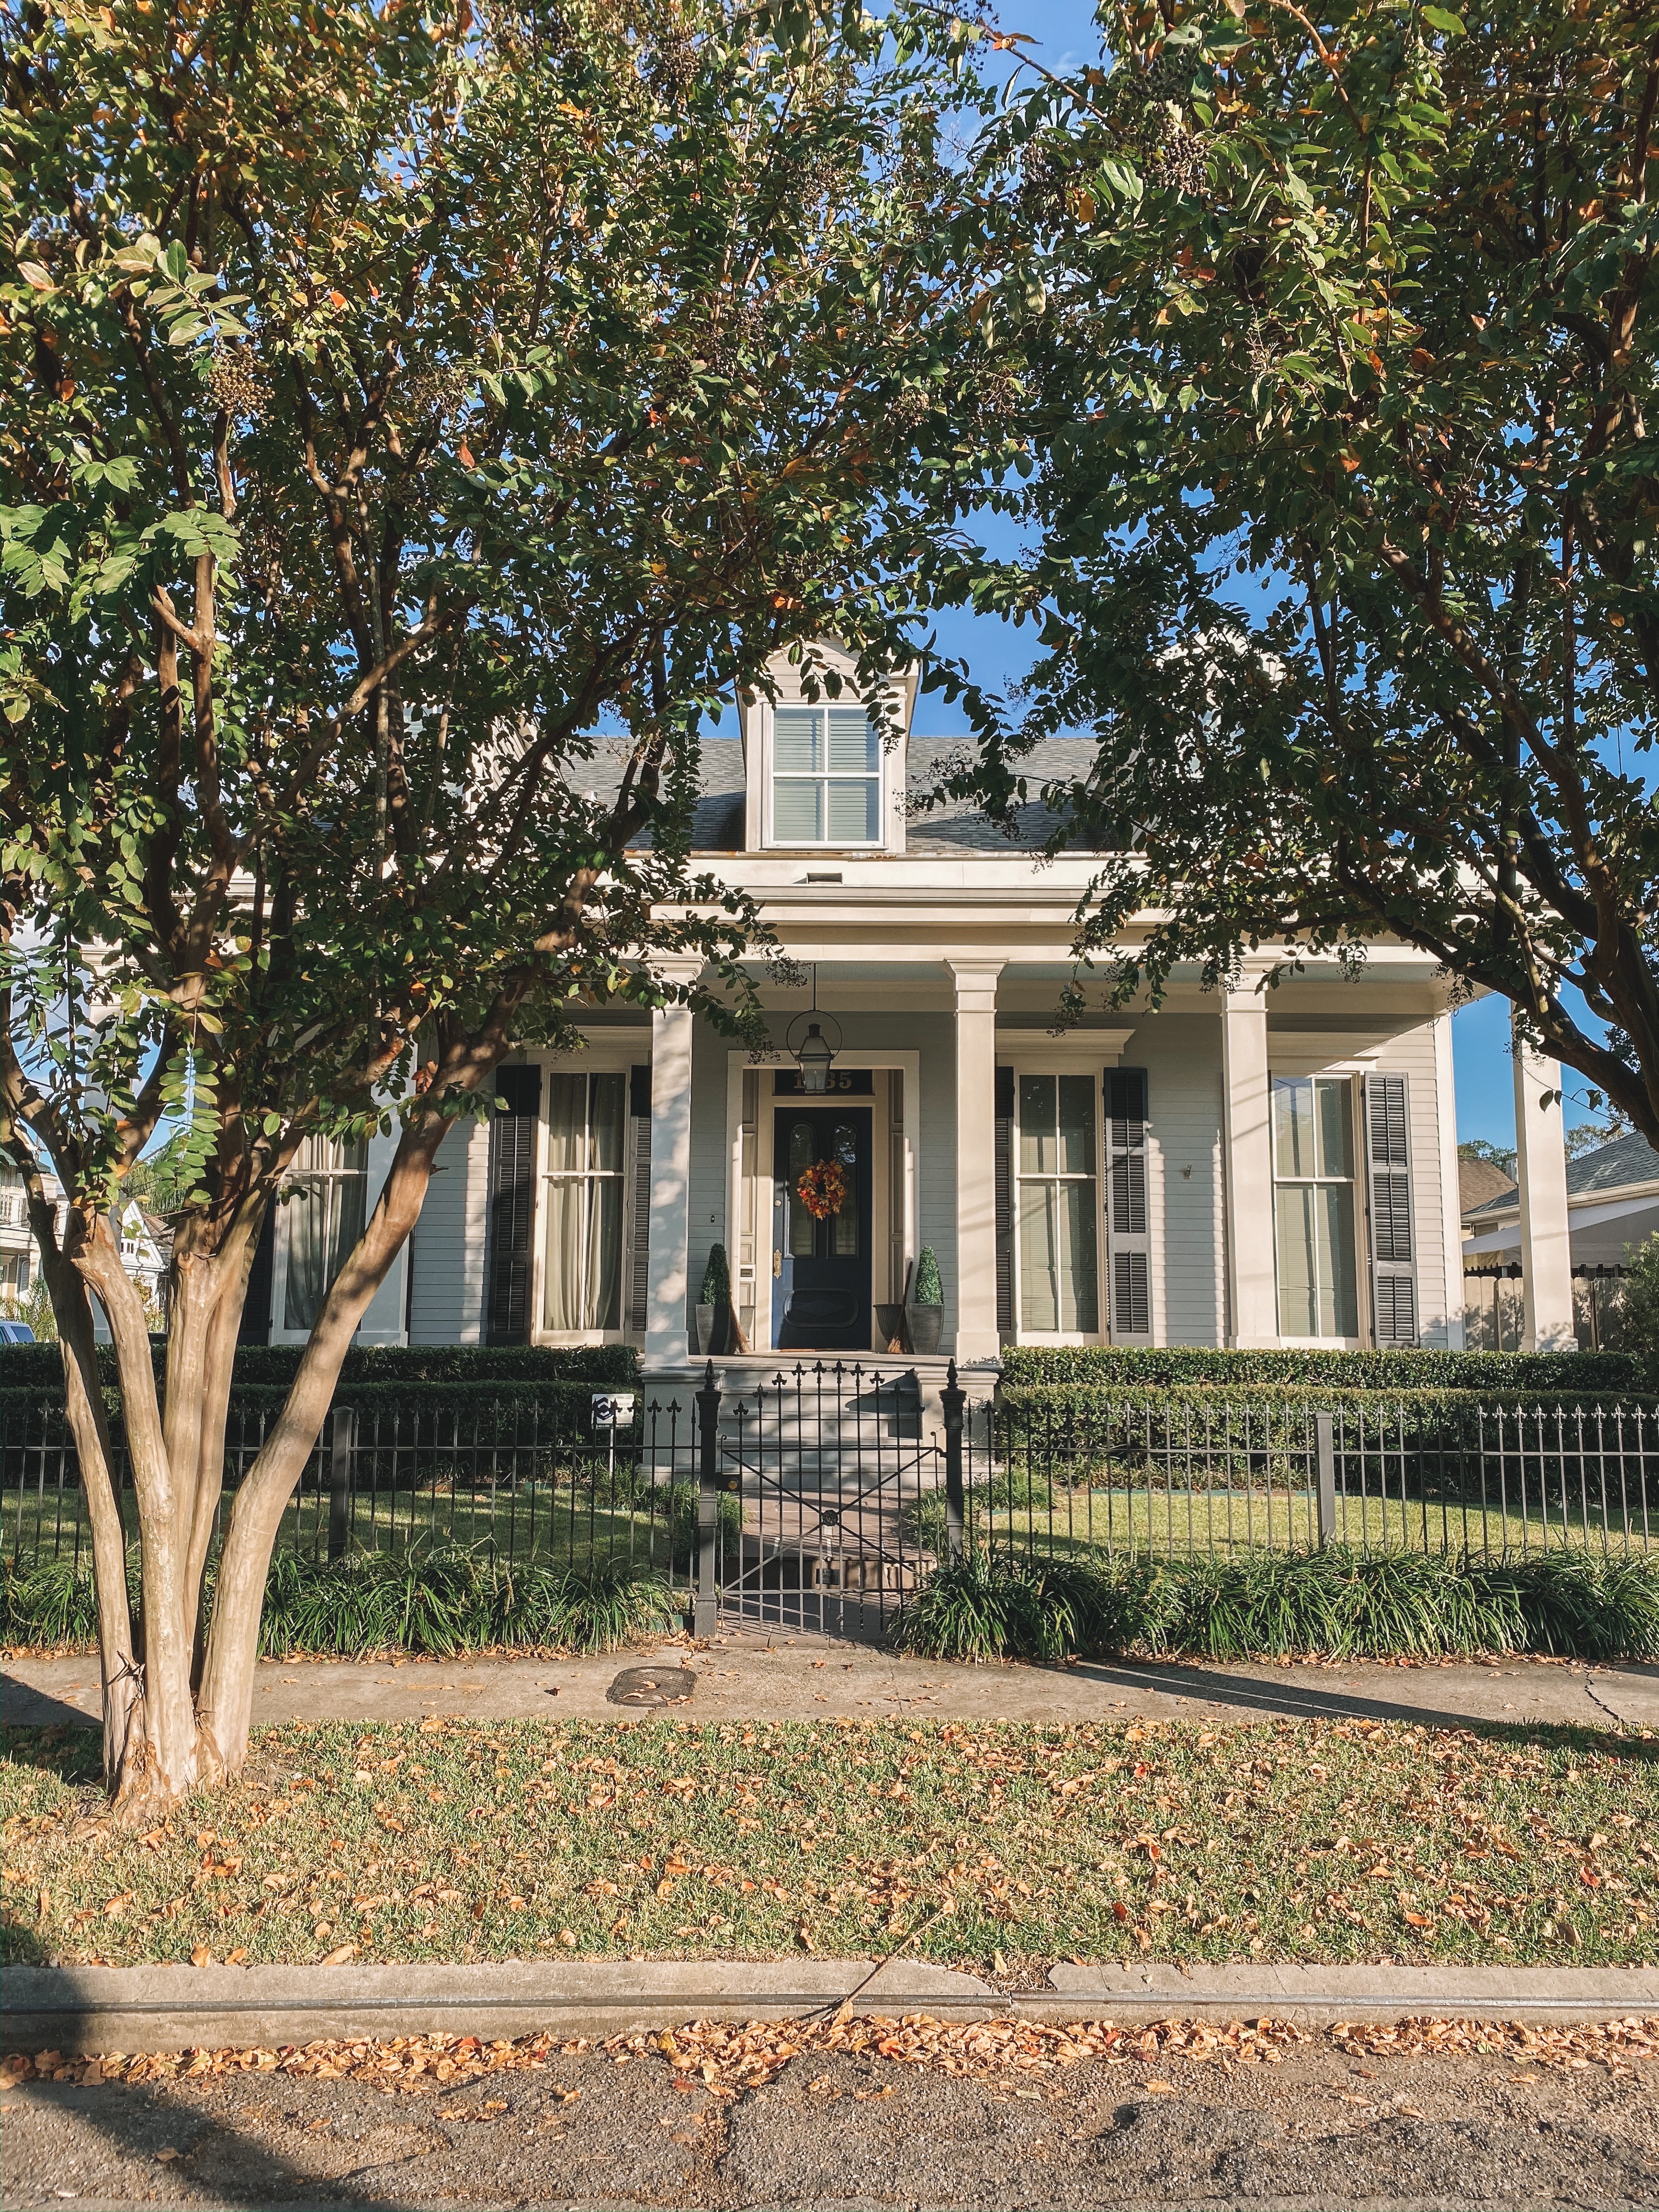 homes of uptown new orleans